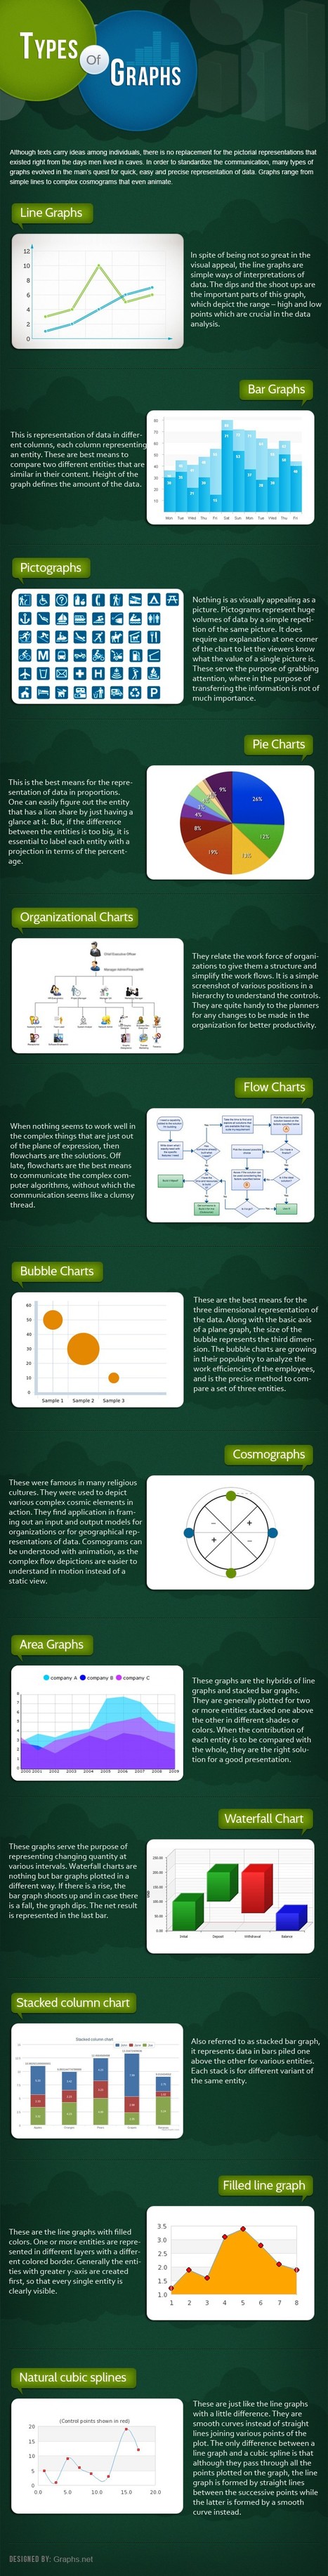 Education: What are the Types Of Graphs | All Infographics | Web 2.0 for juandoming | Scoop.it